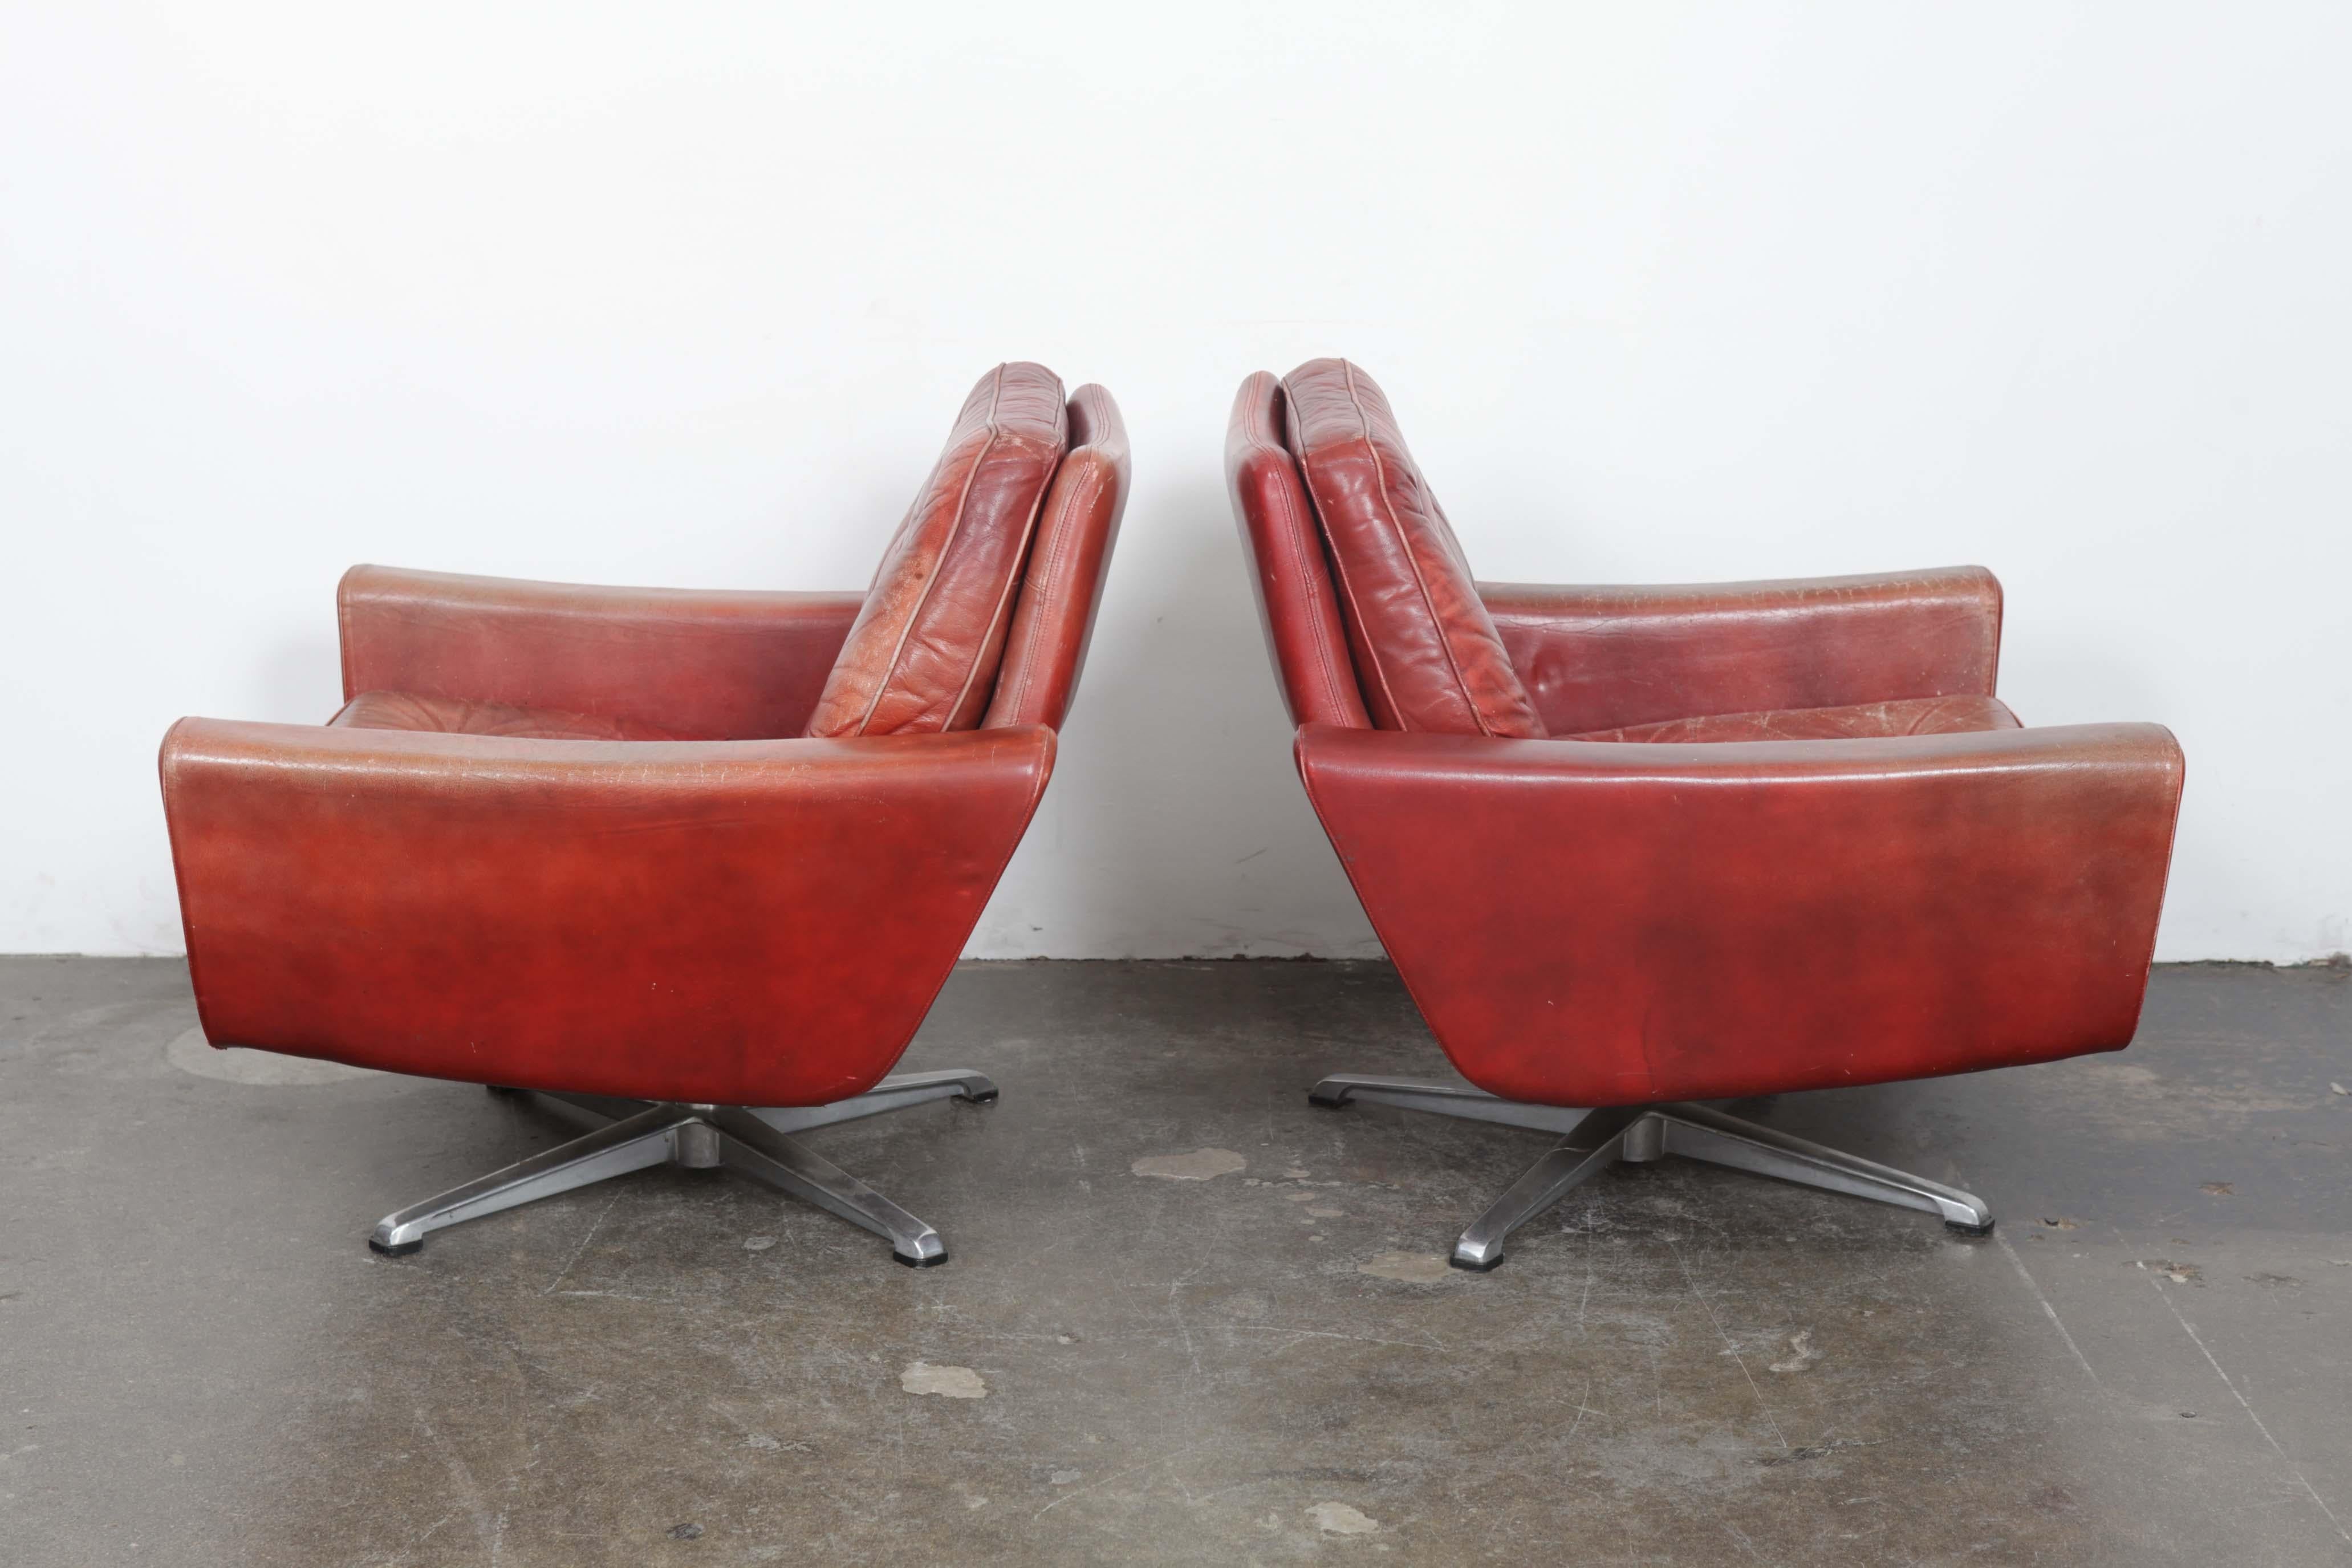 Late 20th Century Pair of Swedish Mid-Century Modern Red Leather Swivel Lounge Chairs